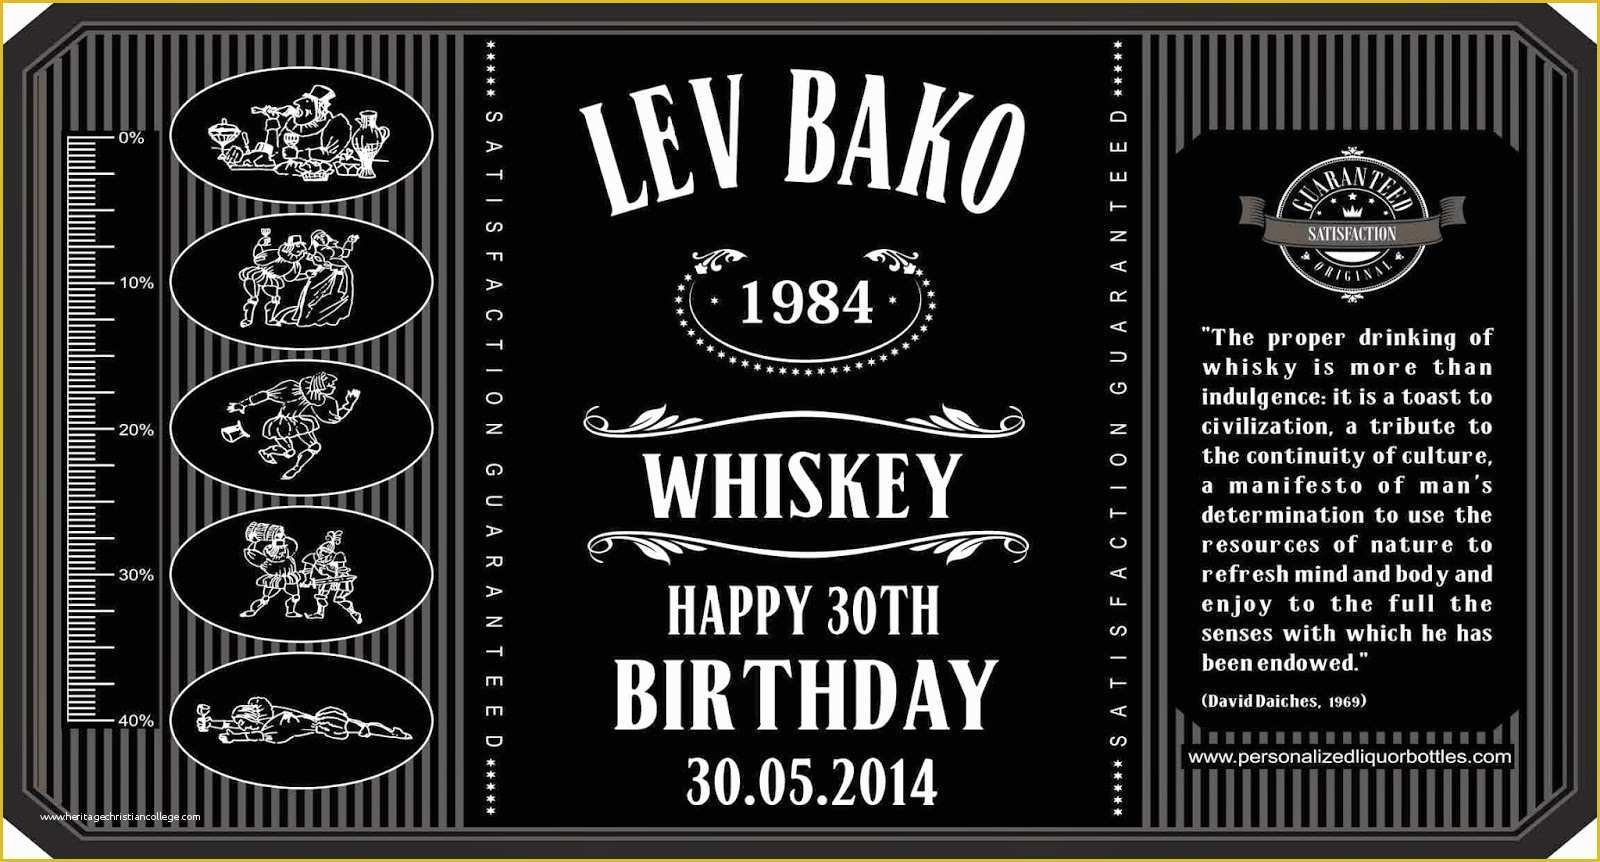 Free Liquor Website Templates Of Personalized Liquor Bottles Personalized Whiskey Bottles